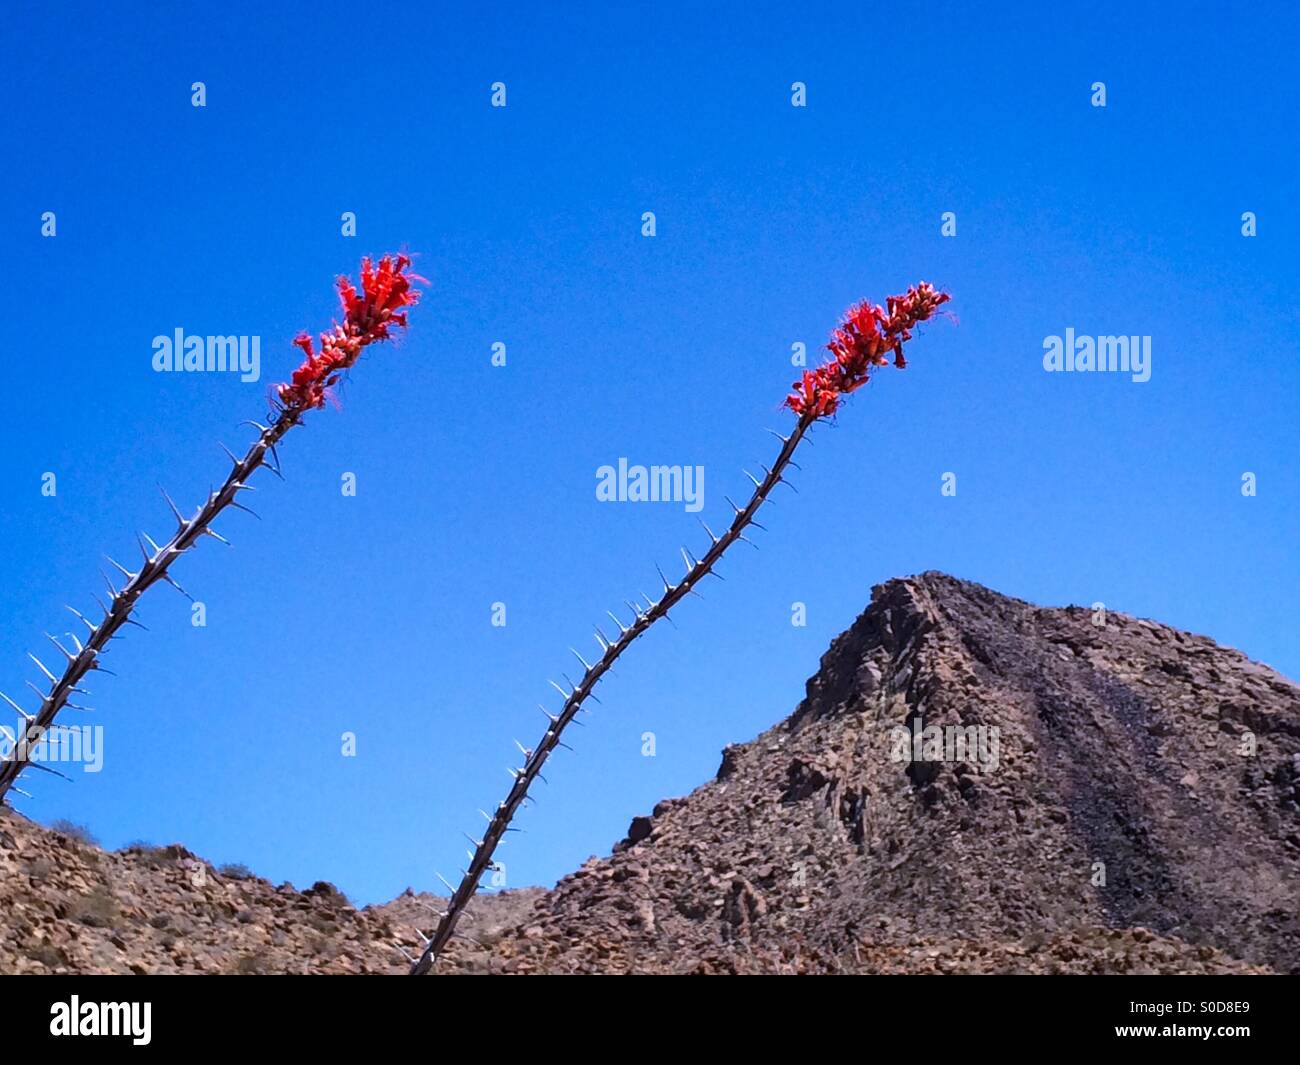 Red tips of the ocotillo plant in bloom at Joshua Tree National Park, California USA Stock Photo